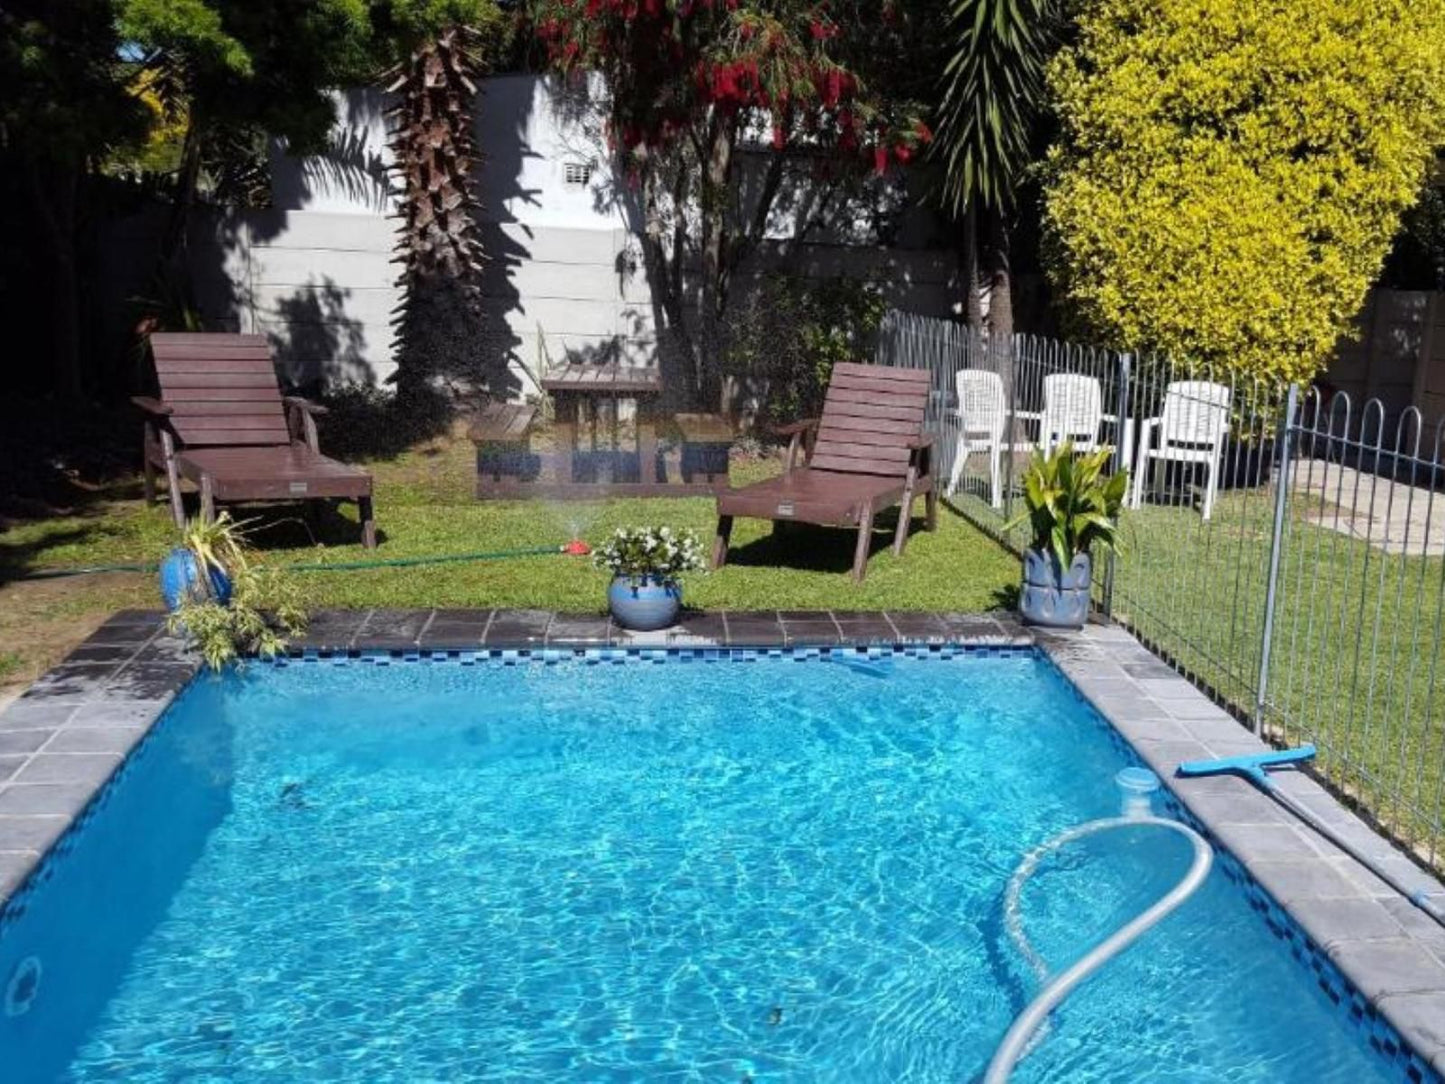 39 On Nile Guesthouse Perridgevale Port Elizabeth Eastern Cape South Africa Complementary Colors, Garden, Nature, Plant, Swimming Pool